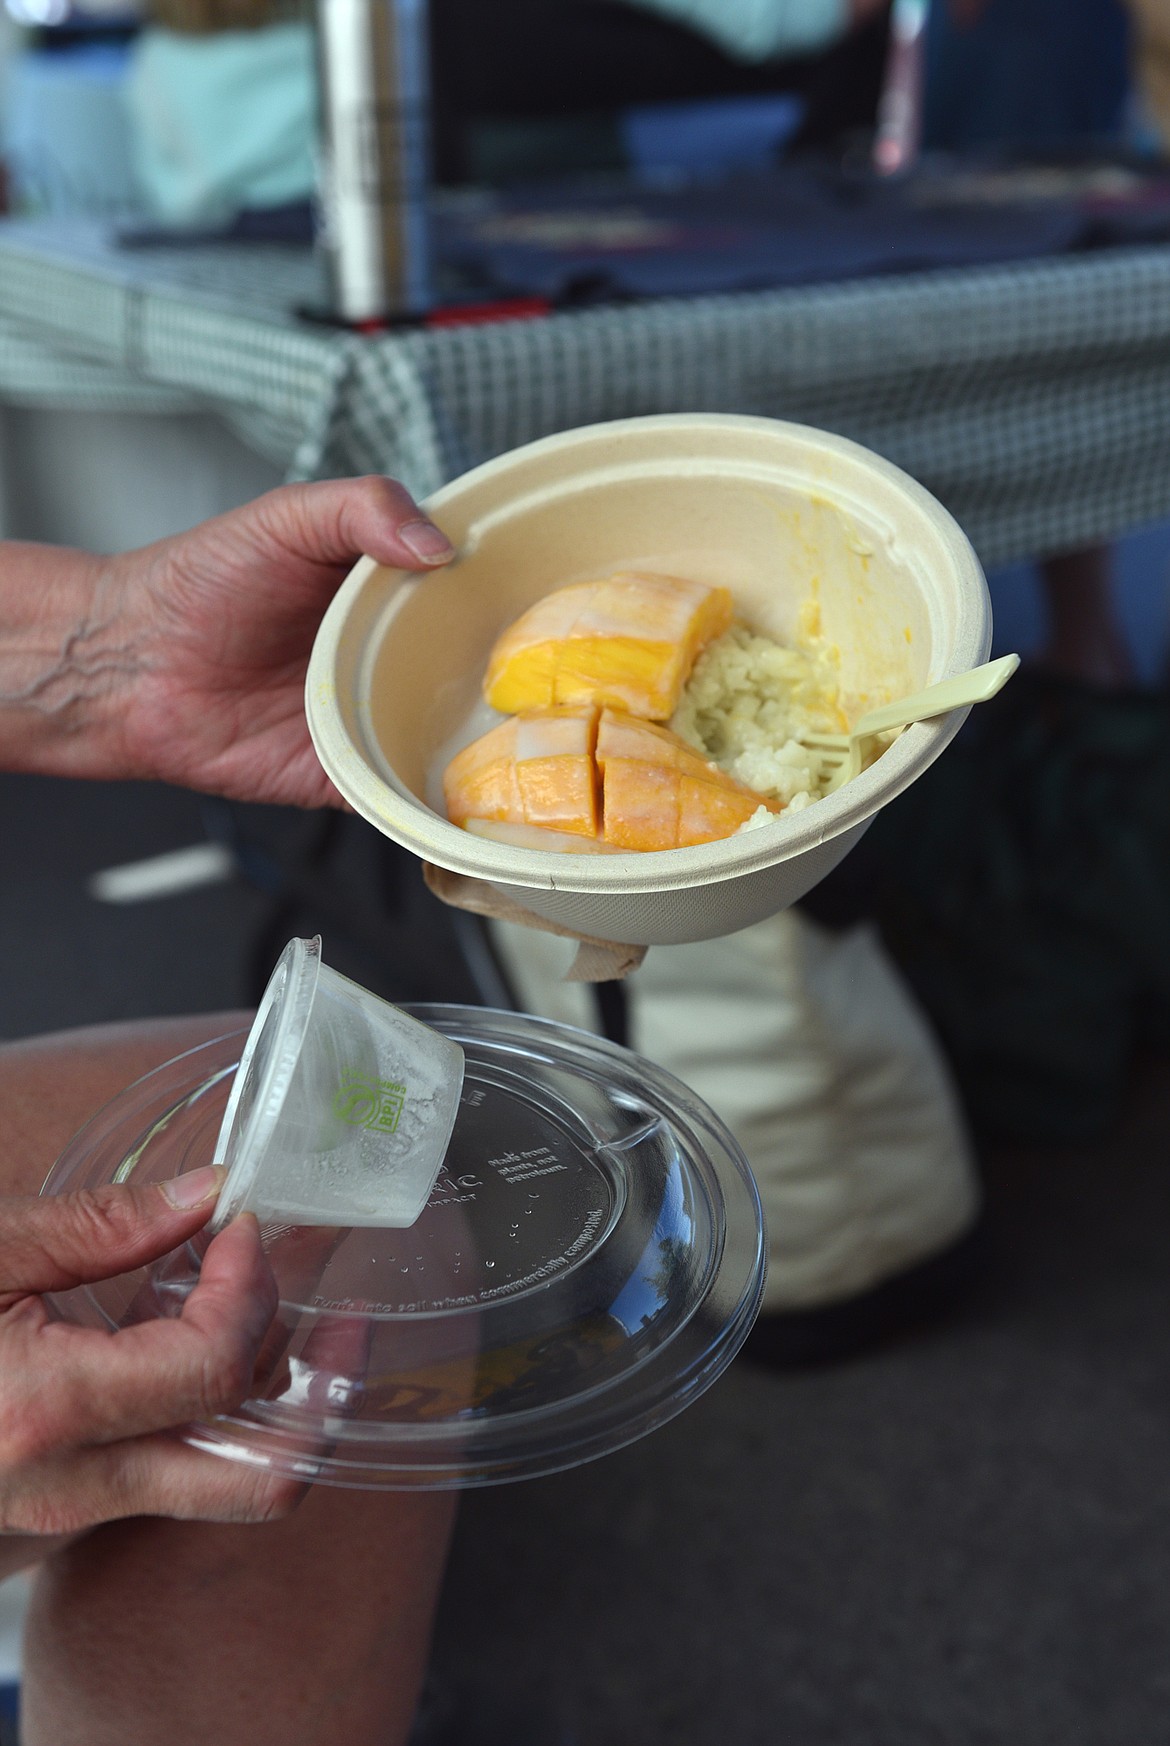 The containers can look sophisticated and even "plastic-like" but all the dishes and utensils purchased at Whitefish Farmers' Market are compostable, along with any food scraps. (Julie Engler/Whitefish Pilot)